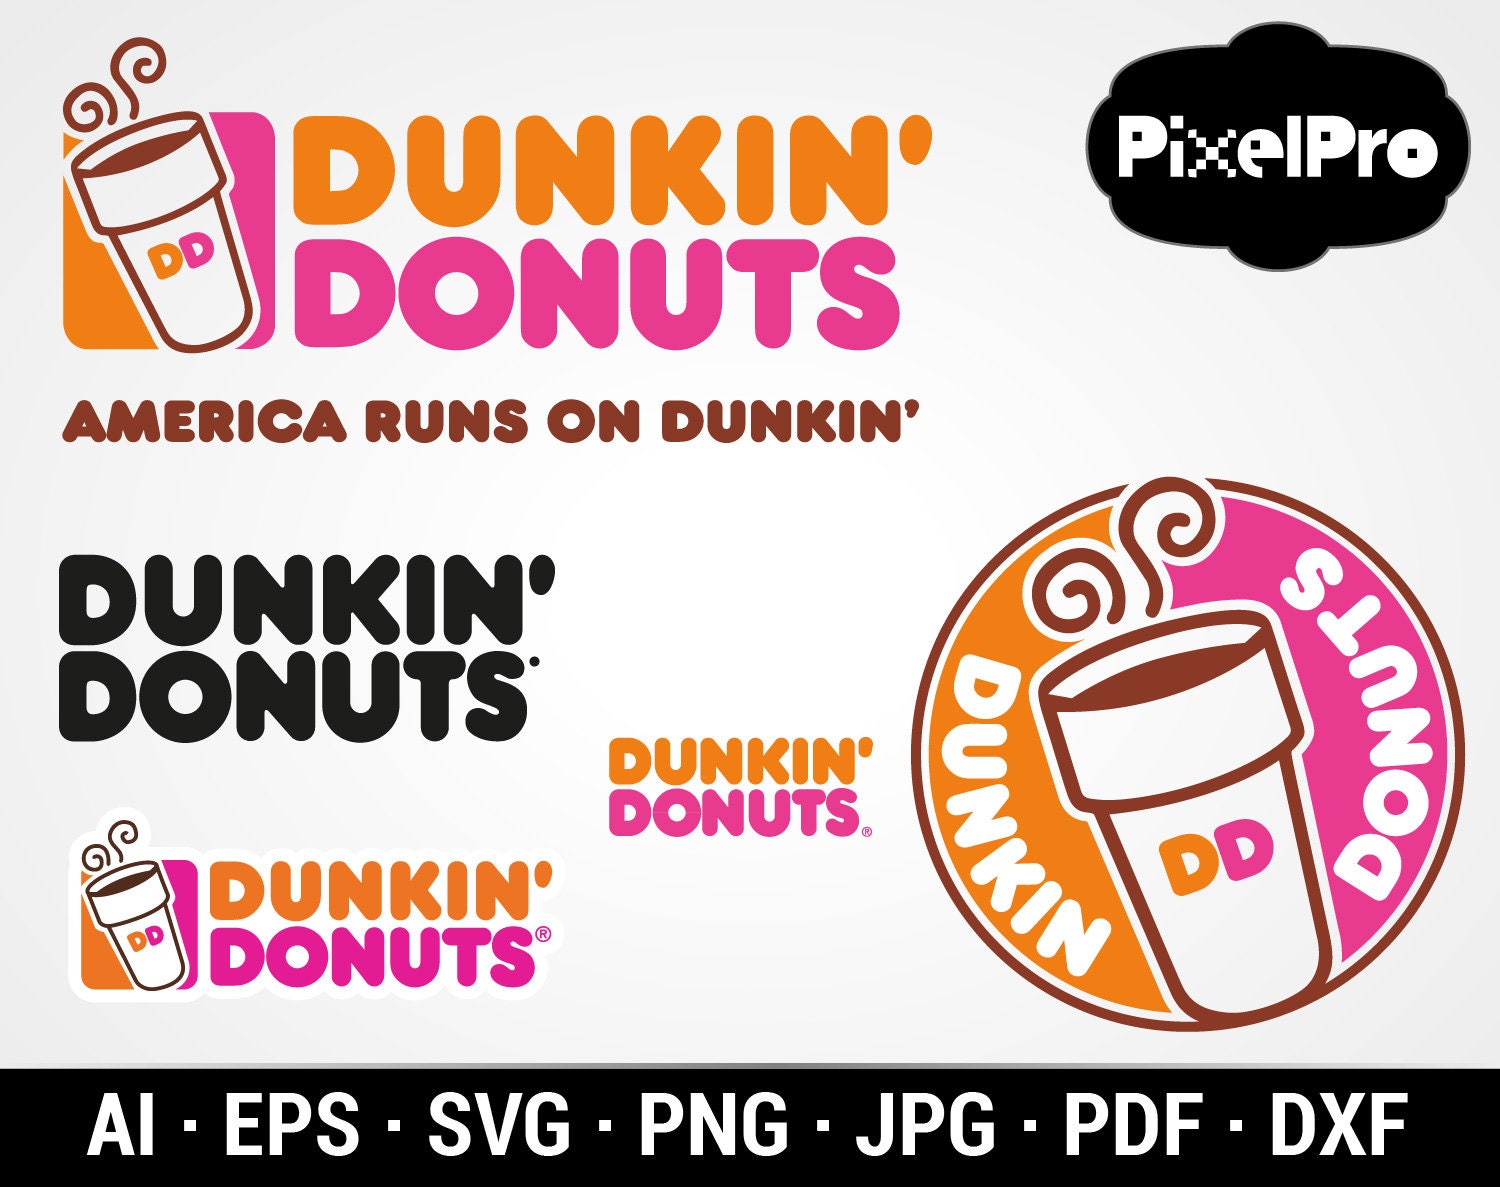 Dunkin Donuts Uniform for sale | Only 3 left at -65%